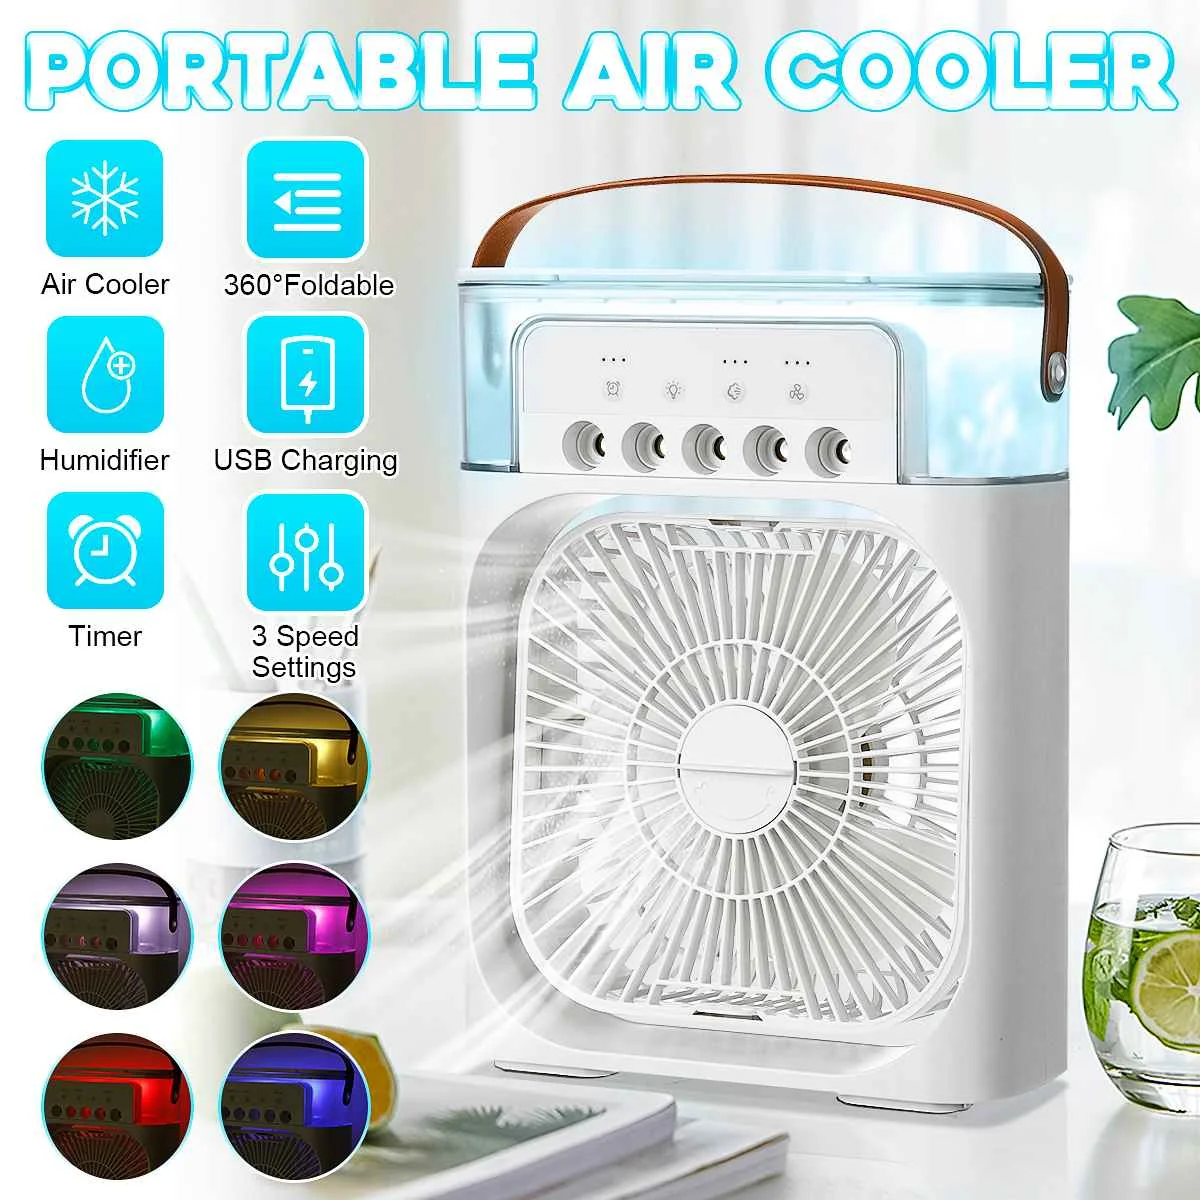 Mini Personal Air Cooler Fan with 3 Speed Mode Portable Air Conditioner Fan Office and Room and USB Input & 7 Colors Night Light Small Humidifier Air Cooler Desk Table Fan Handle for Home